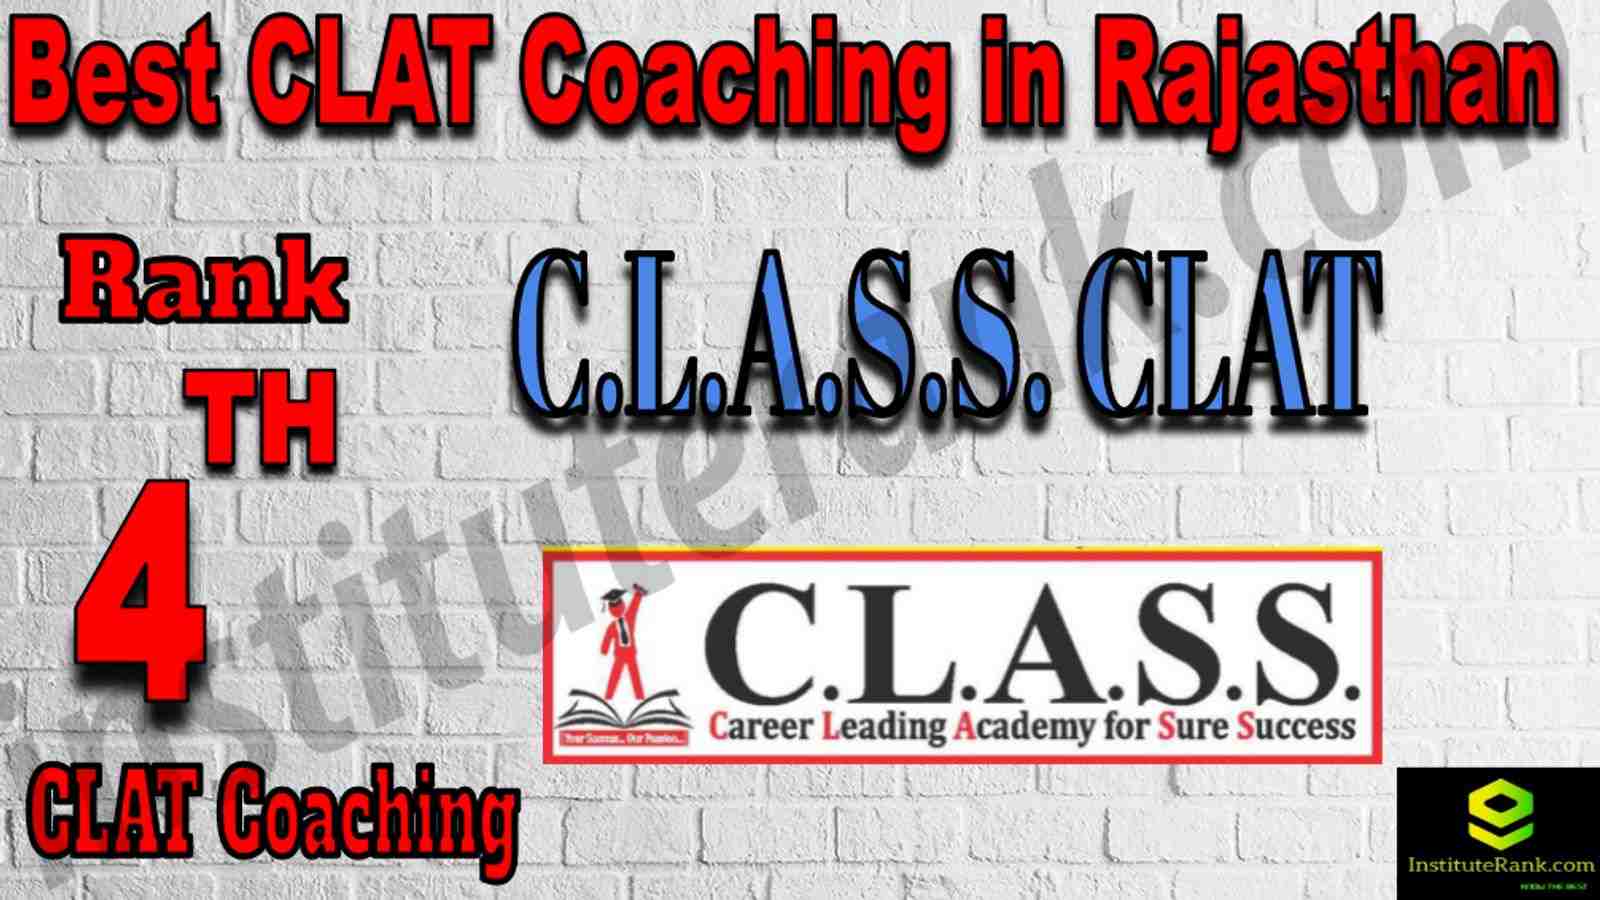 4th Best Clat Coaching in Rajasthan